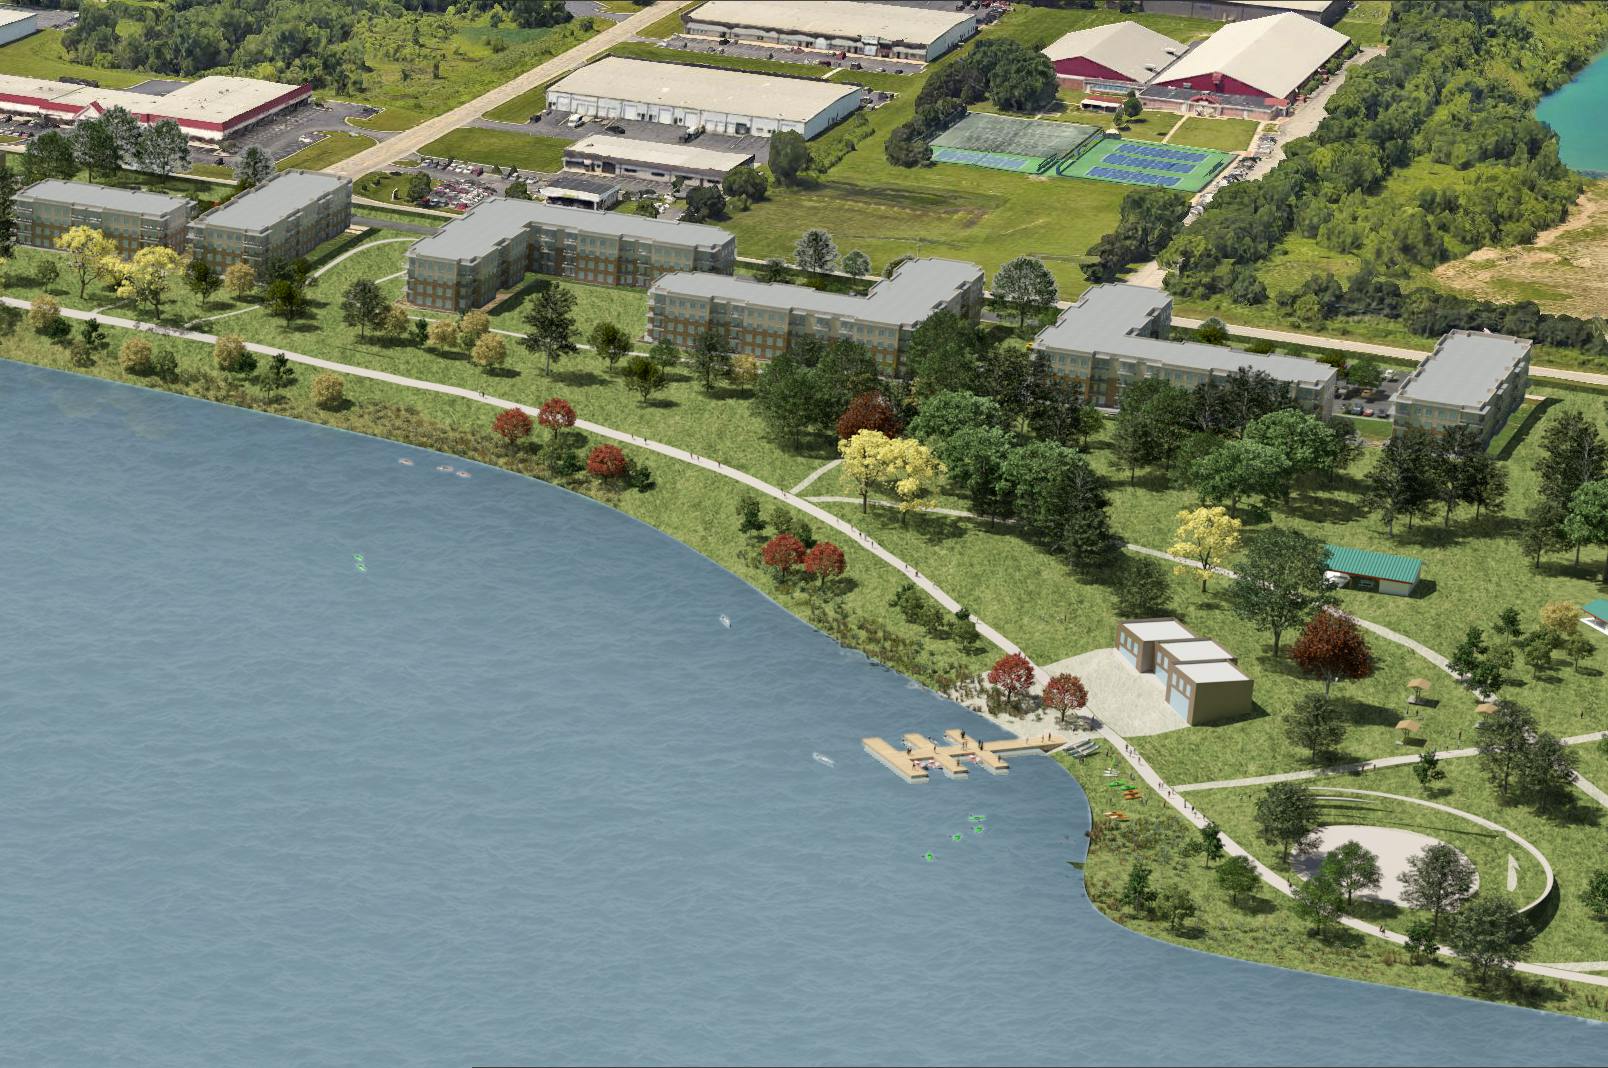 Conceptual illustration of planned amenities at Cary Lake at Rotary Park